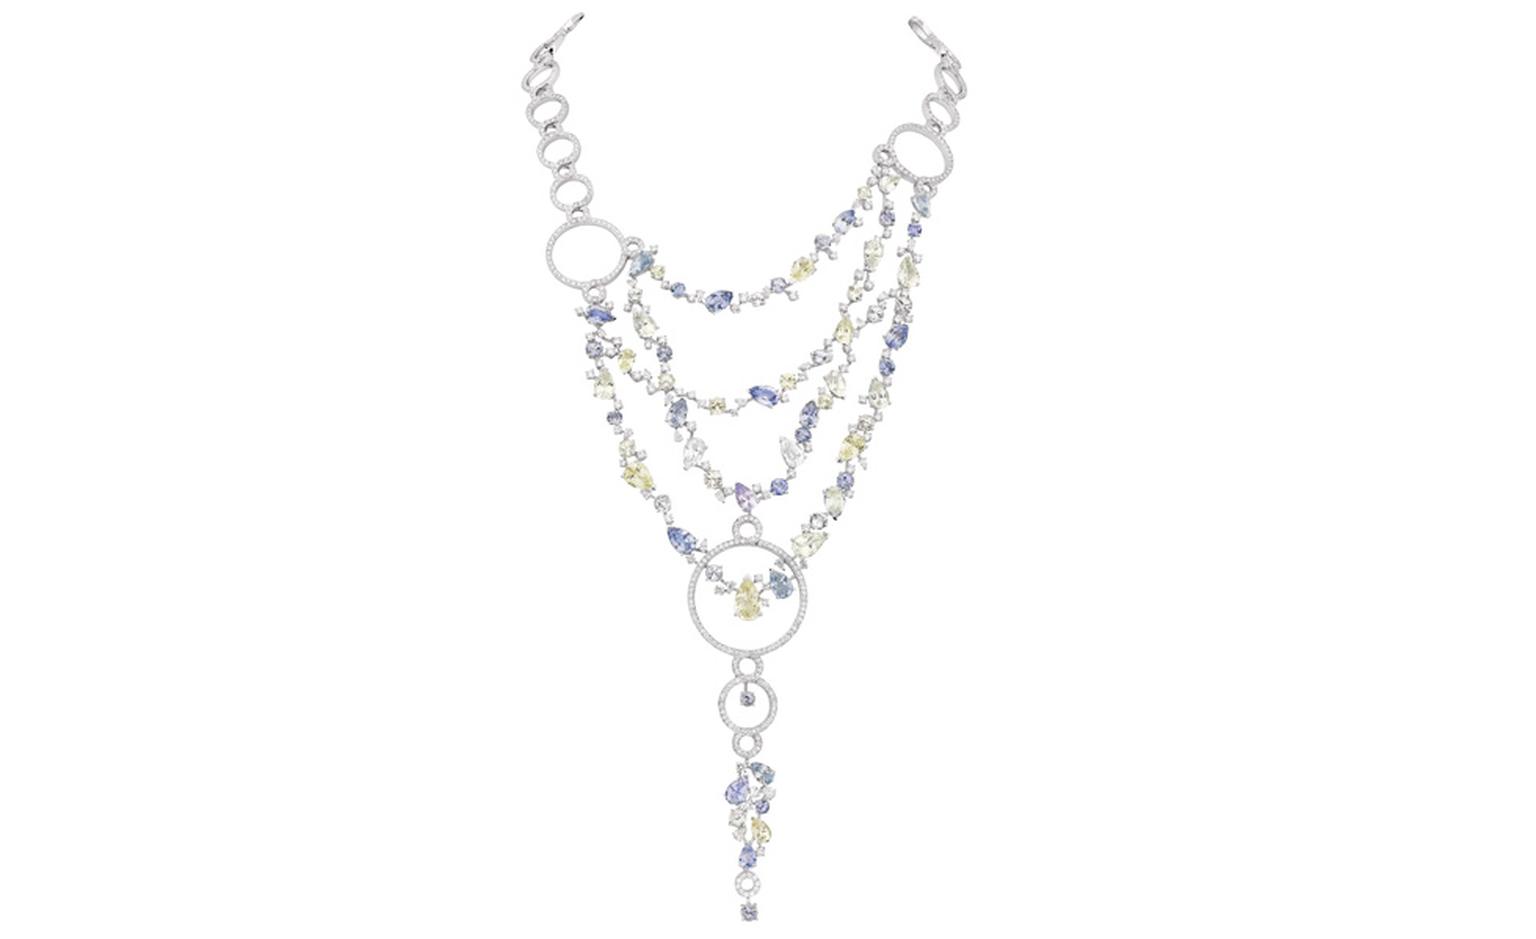 Chanel's Vénitienne necklace with multi-coloured sapphires and diamonds is inspired by Venice and its motifs. POA